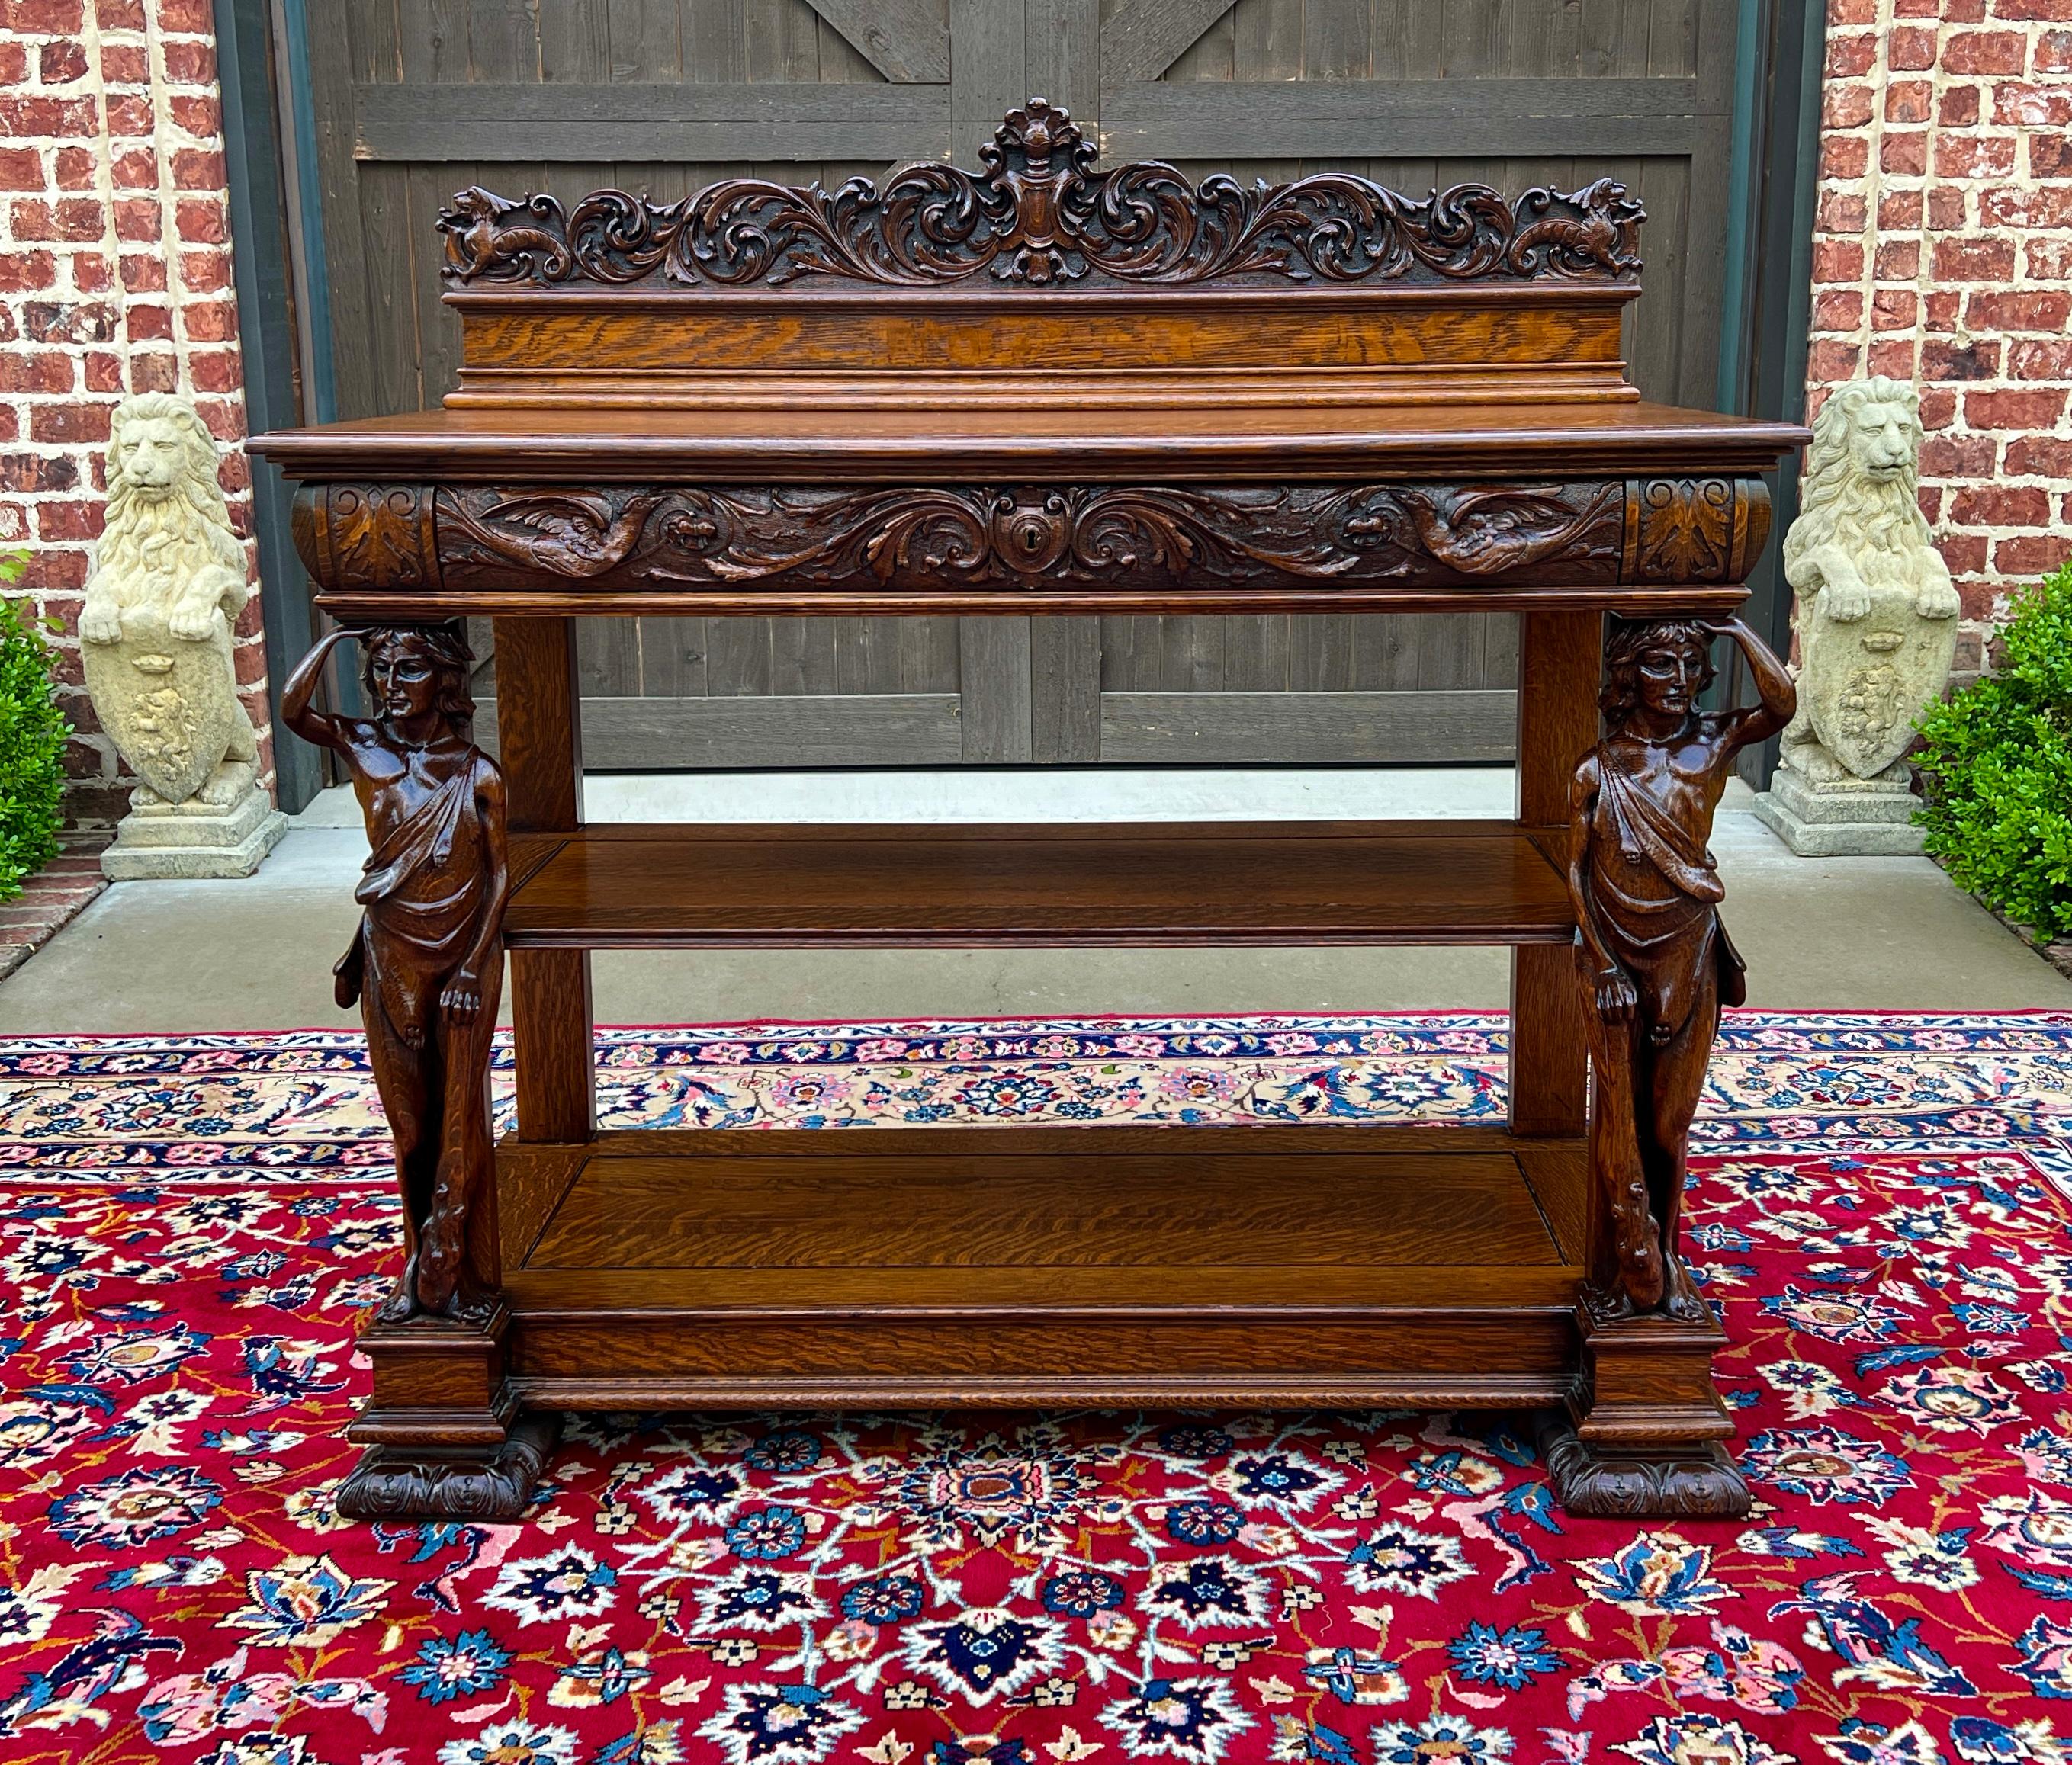 EXQUISITE Antique American Highly Carved Quartersawn Oak 3-Tier Console, Sofa Table or Sideboard/Server~~Attributed to American Furniture Maker R.J. Horner~~c. Early 20th Century

The FINEST we've ever offered! HIGHLY CARVED antique American